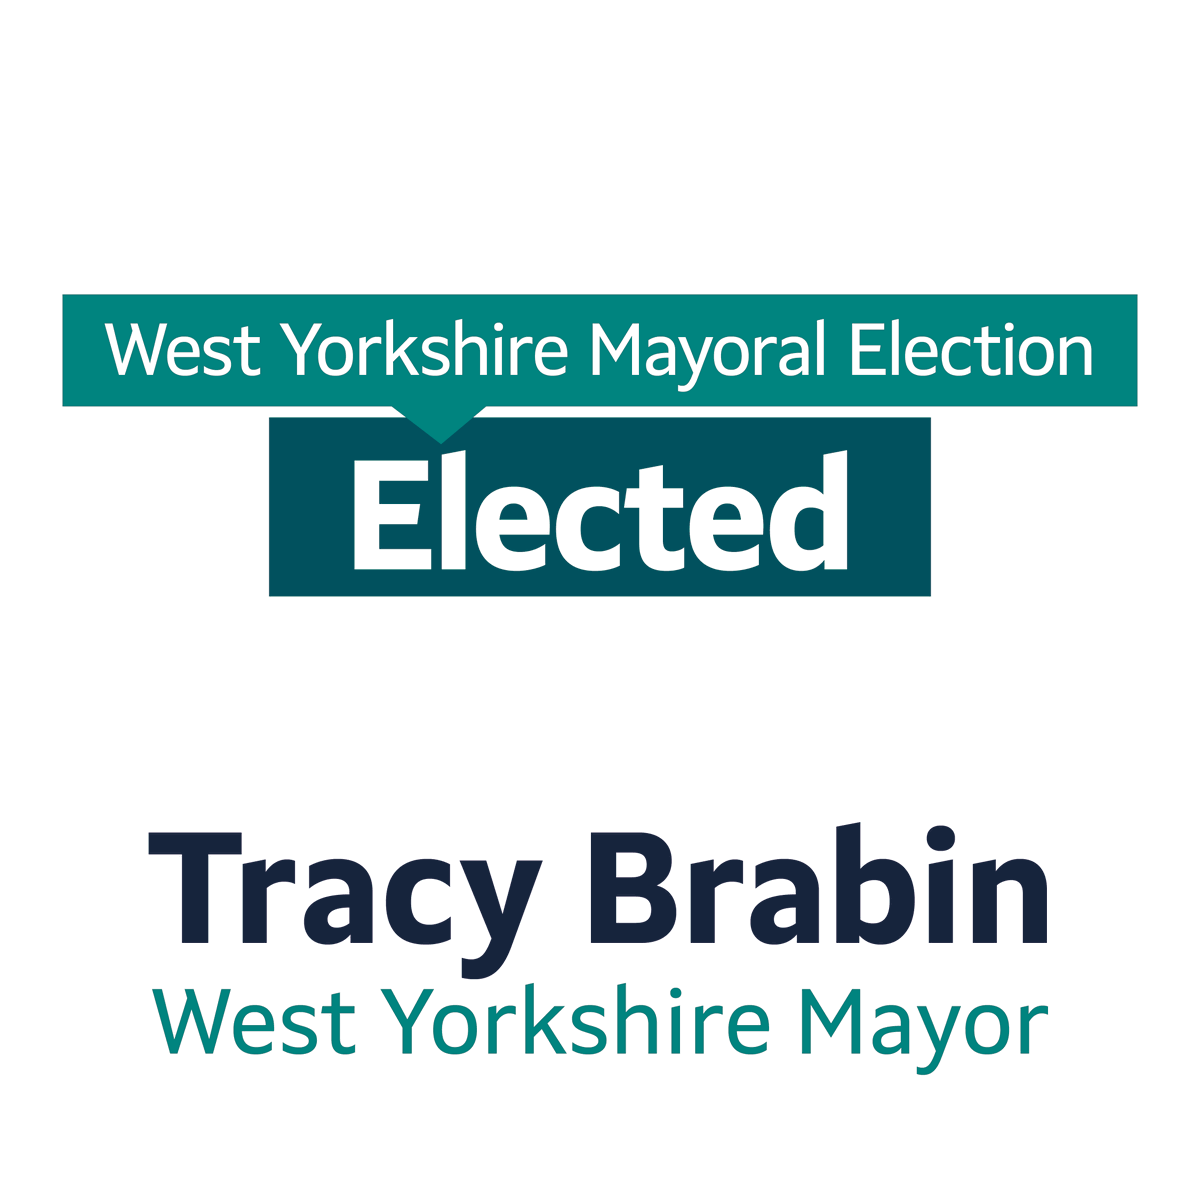 📊 The 2 May election results for West Yorkshire are now official. Tracy Brabin, representing the Labour and Co-operative Party, has been re-elected for her second term as Mayor, representing 2.4 million residents across the region. #WYelects